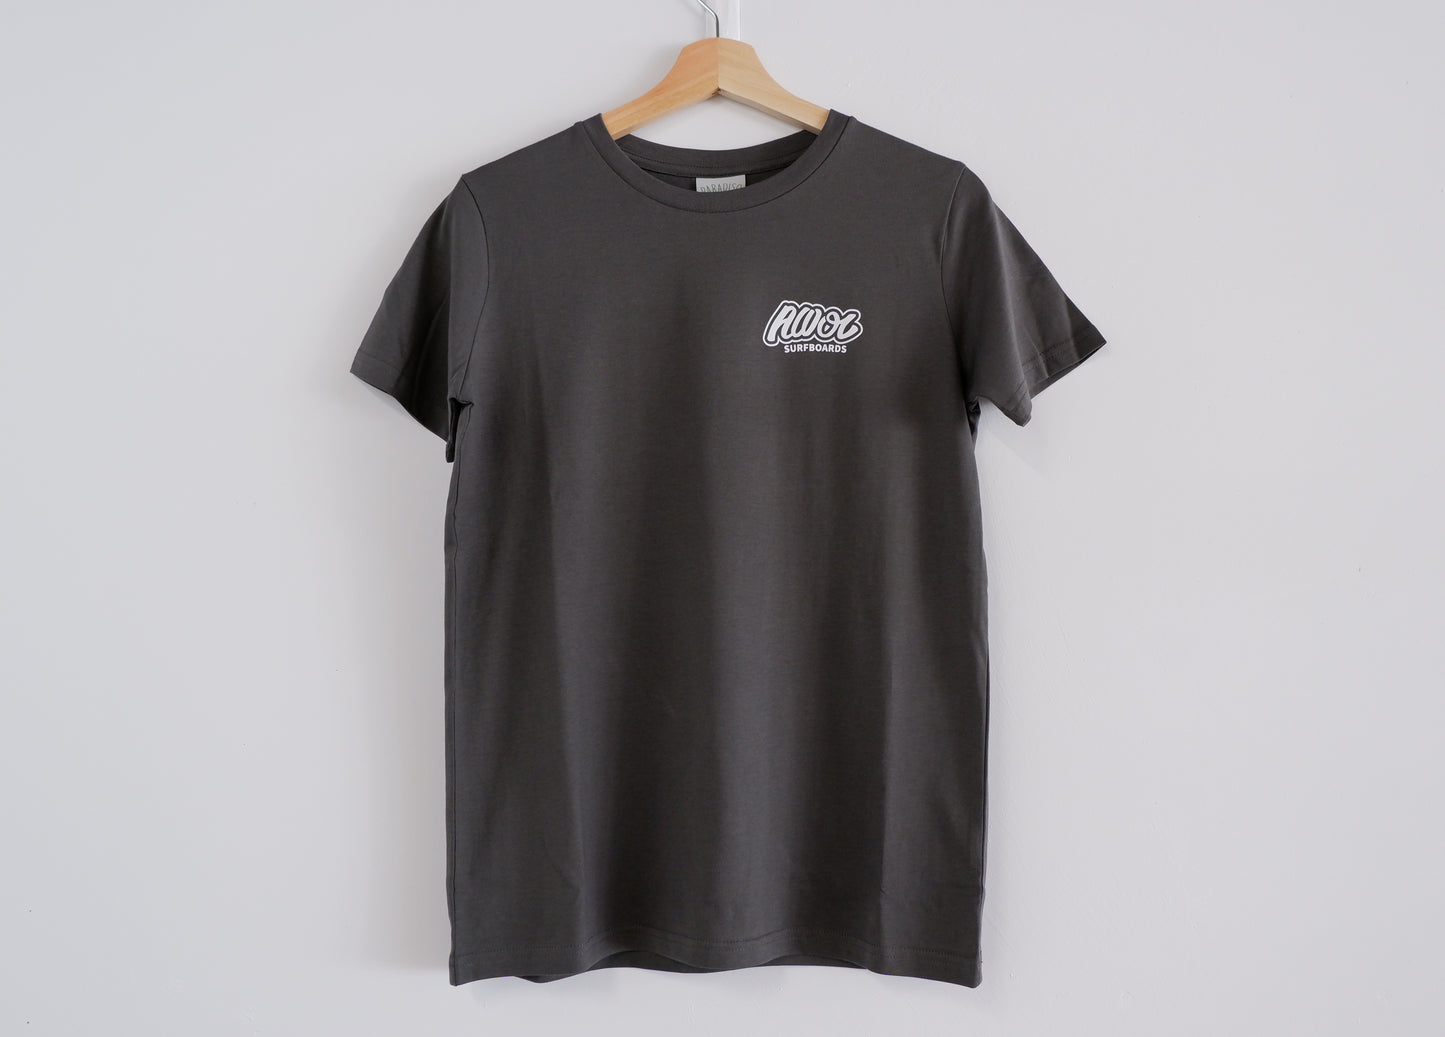 Awol Surfboards Youth Tee